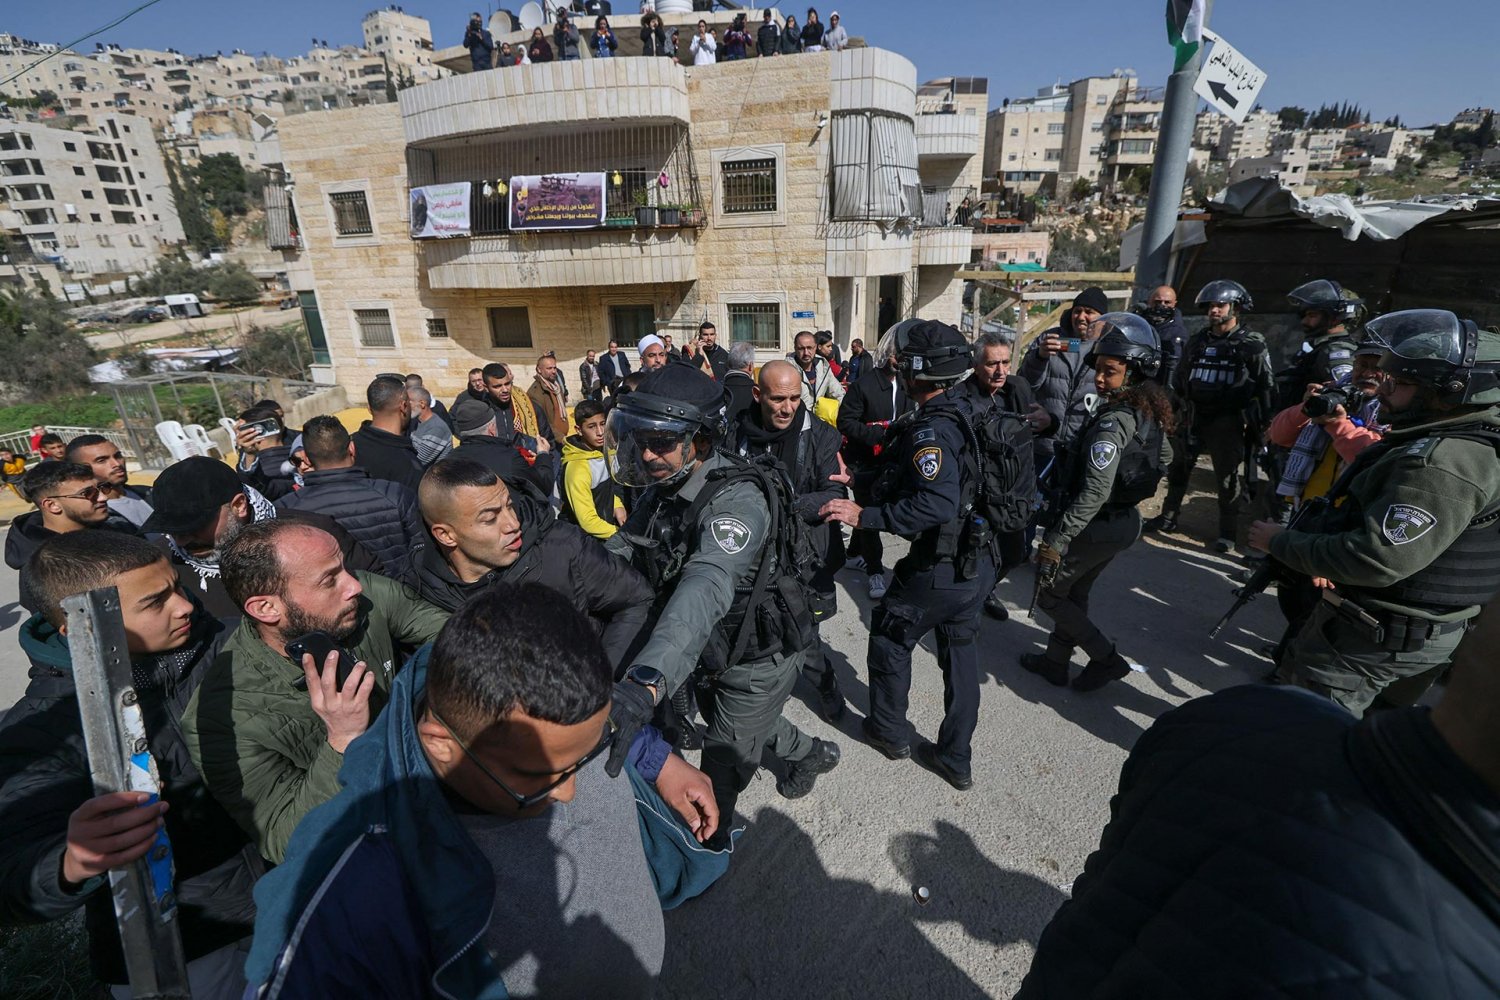 Police forcibly break up a solidarity prayer by East Jerusalem Muslims at a building slated for demolition